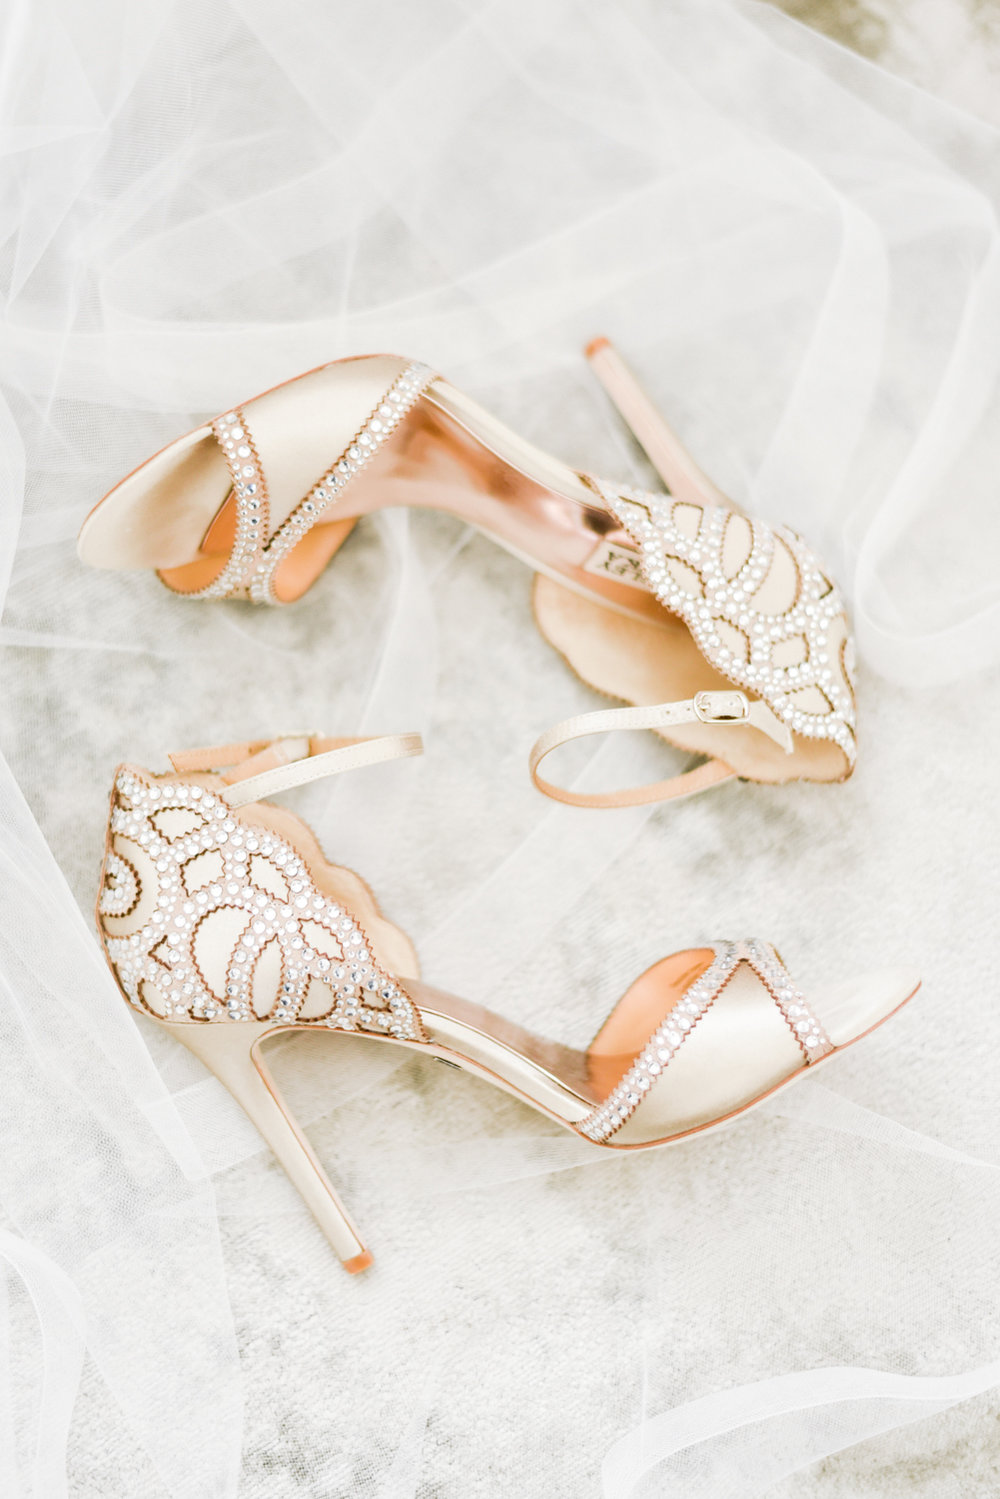 Bridal shoes laying on veil